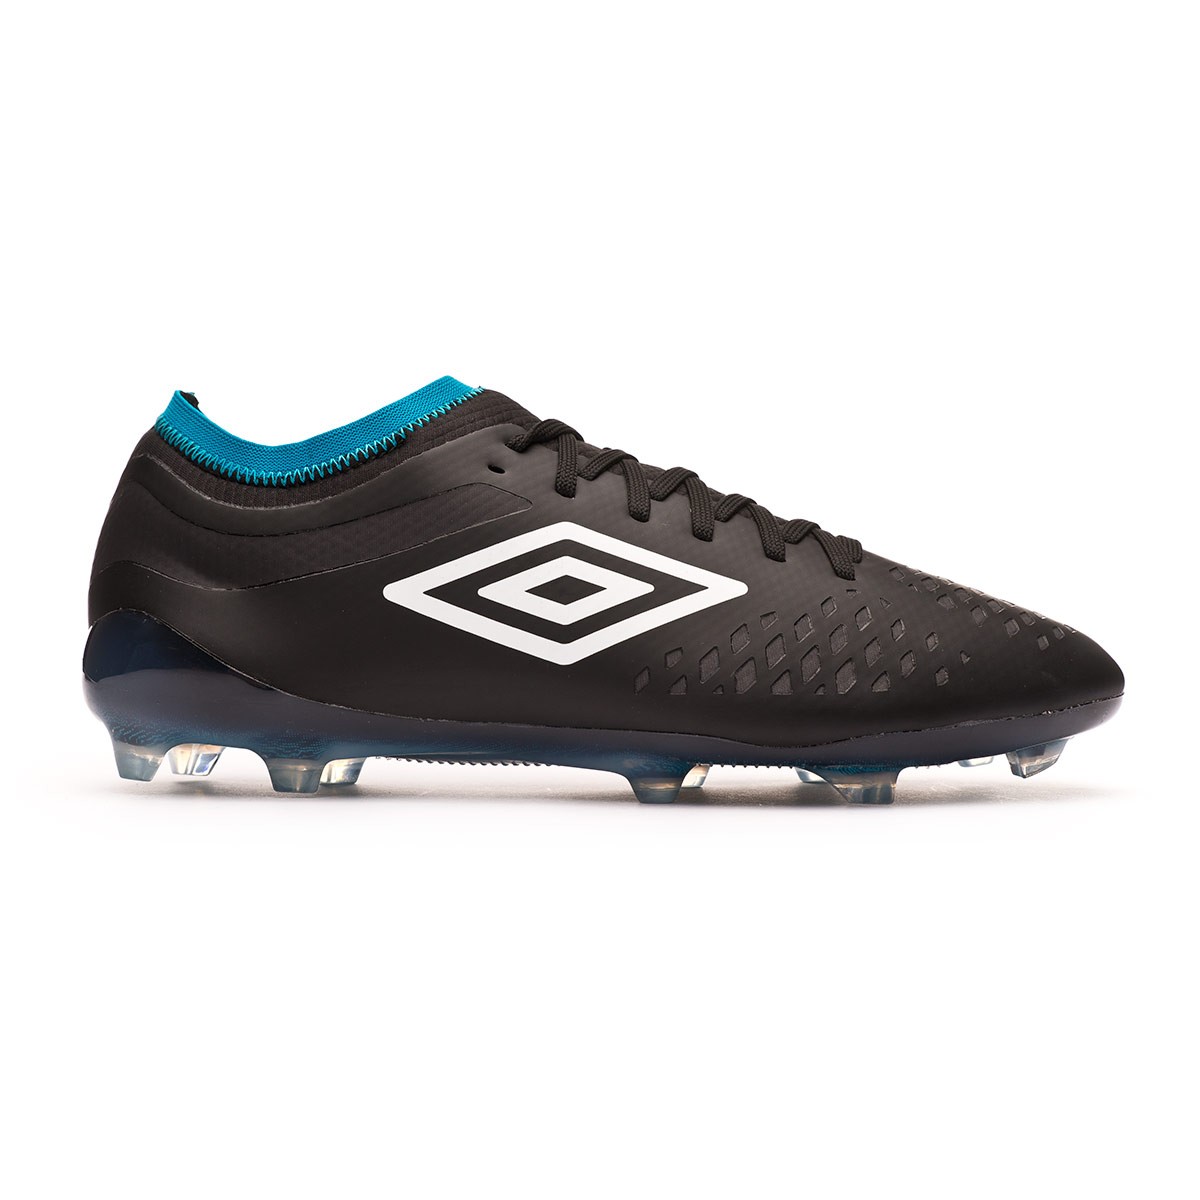 umbro soccer shoes price